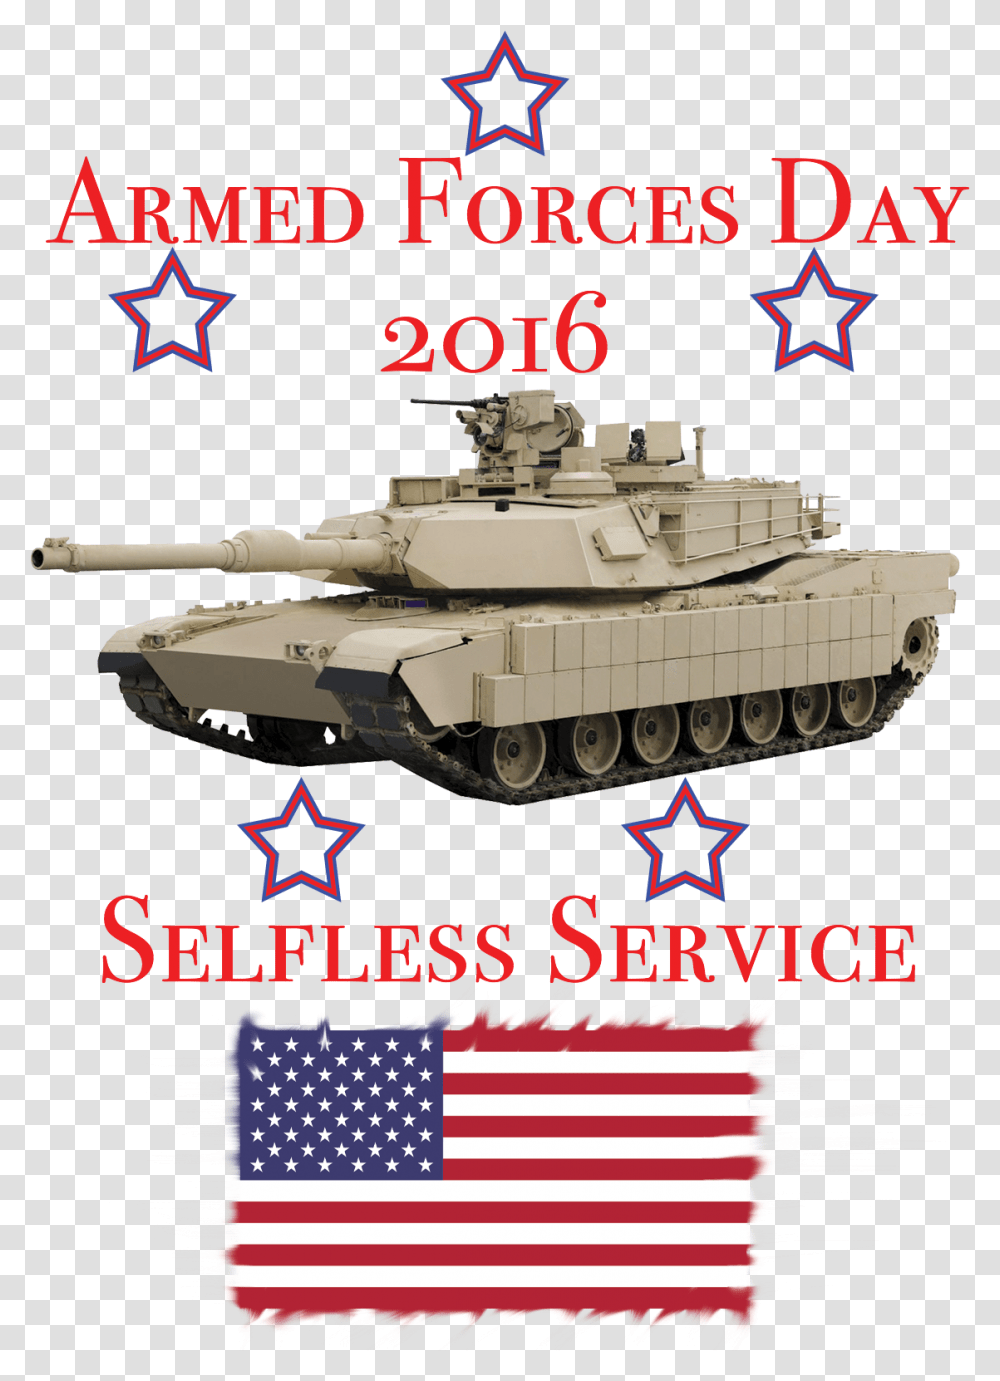 Armed Forces Day Clipart Abrams Tank, Military Uniform, Army, Armored, Vehicle Transparent Png